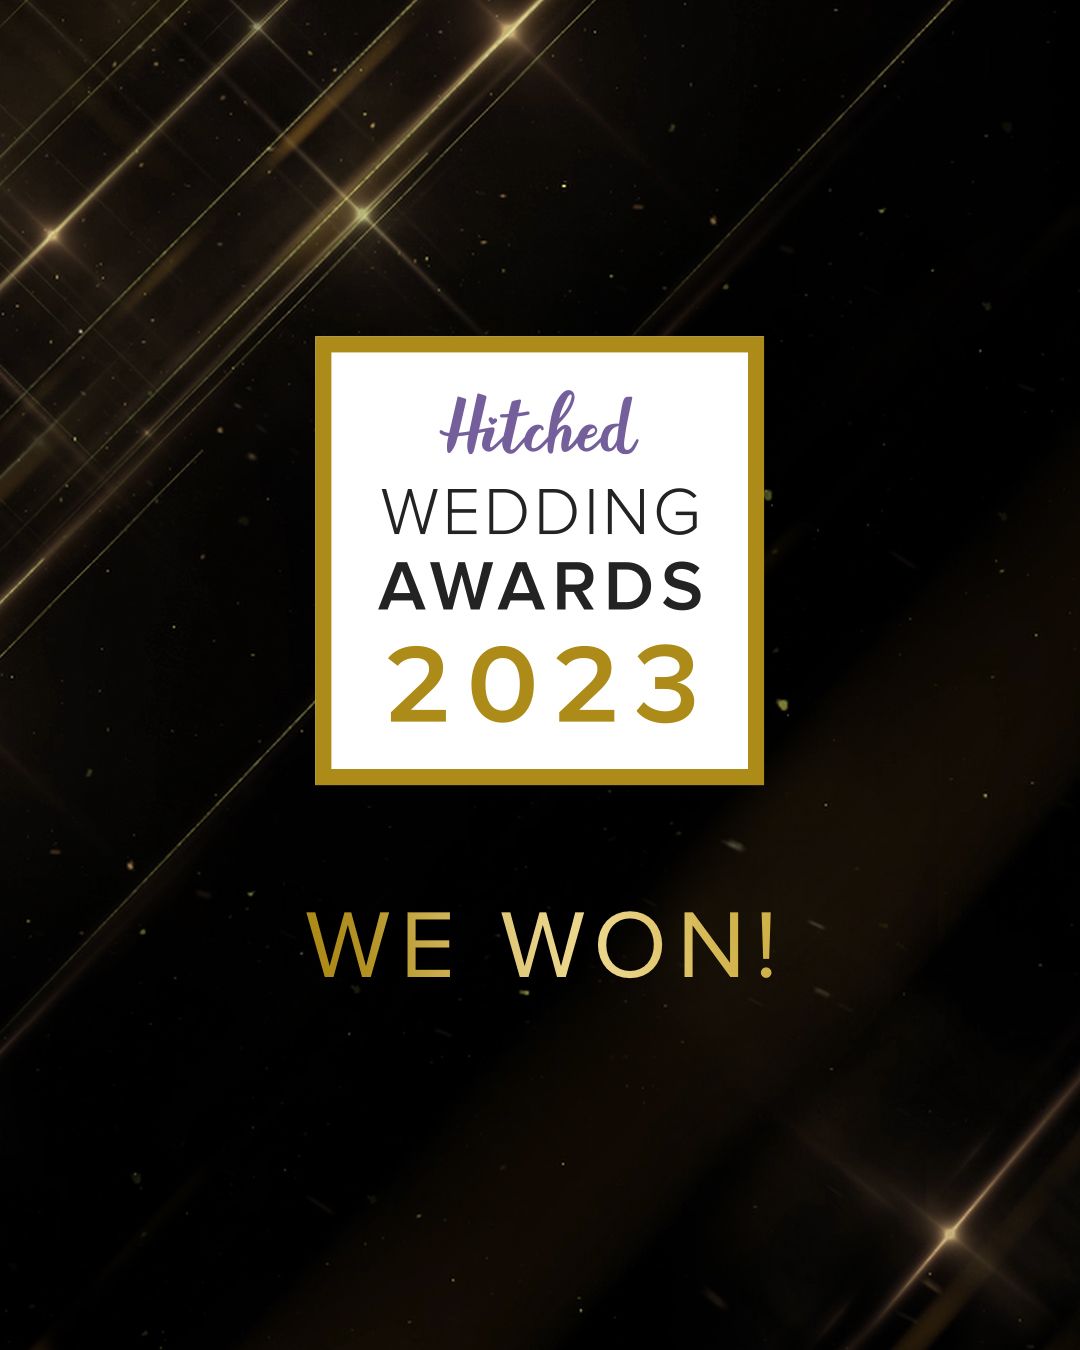 ChrisJFilms: Wedding Films won the Hitched.co.uk
Wedding Awards 2023 and has been proclaimed one
of the best wedding professionals in the UK.